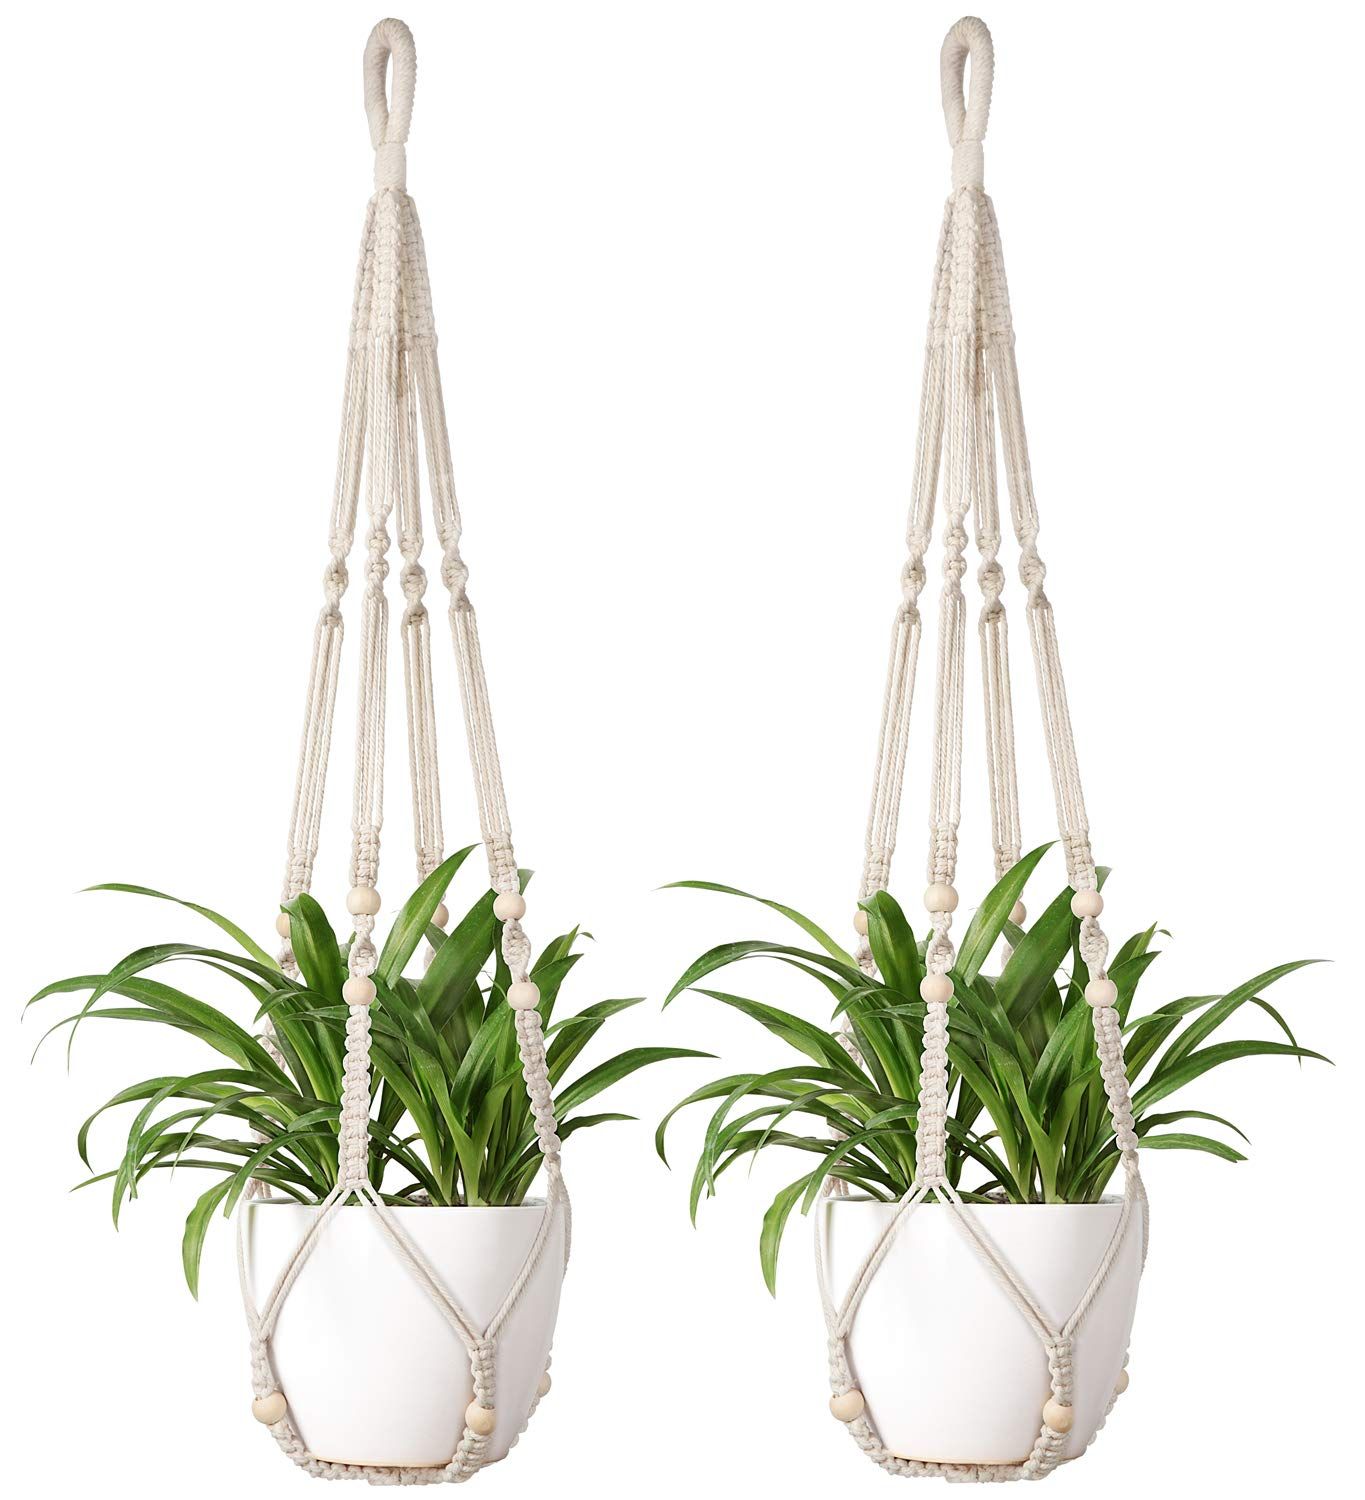 Mkono Macrame Plant Hanger Indoor Hanging Planter Basket with Wood Beads Decorative Flower Pot Holder No Tassels for Indoor Outdoor Boho Home Decor 35 Inch, Ivory, Set of 2 (POTS NOT Included) | Amazon (US)